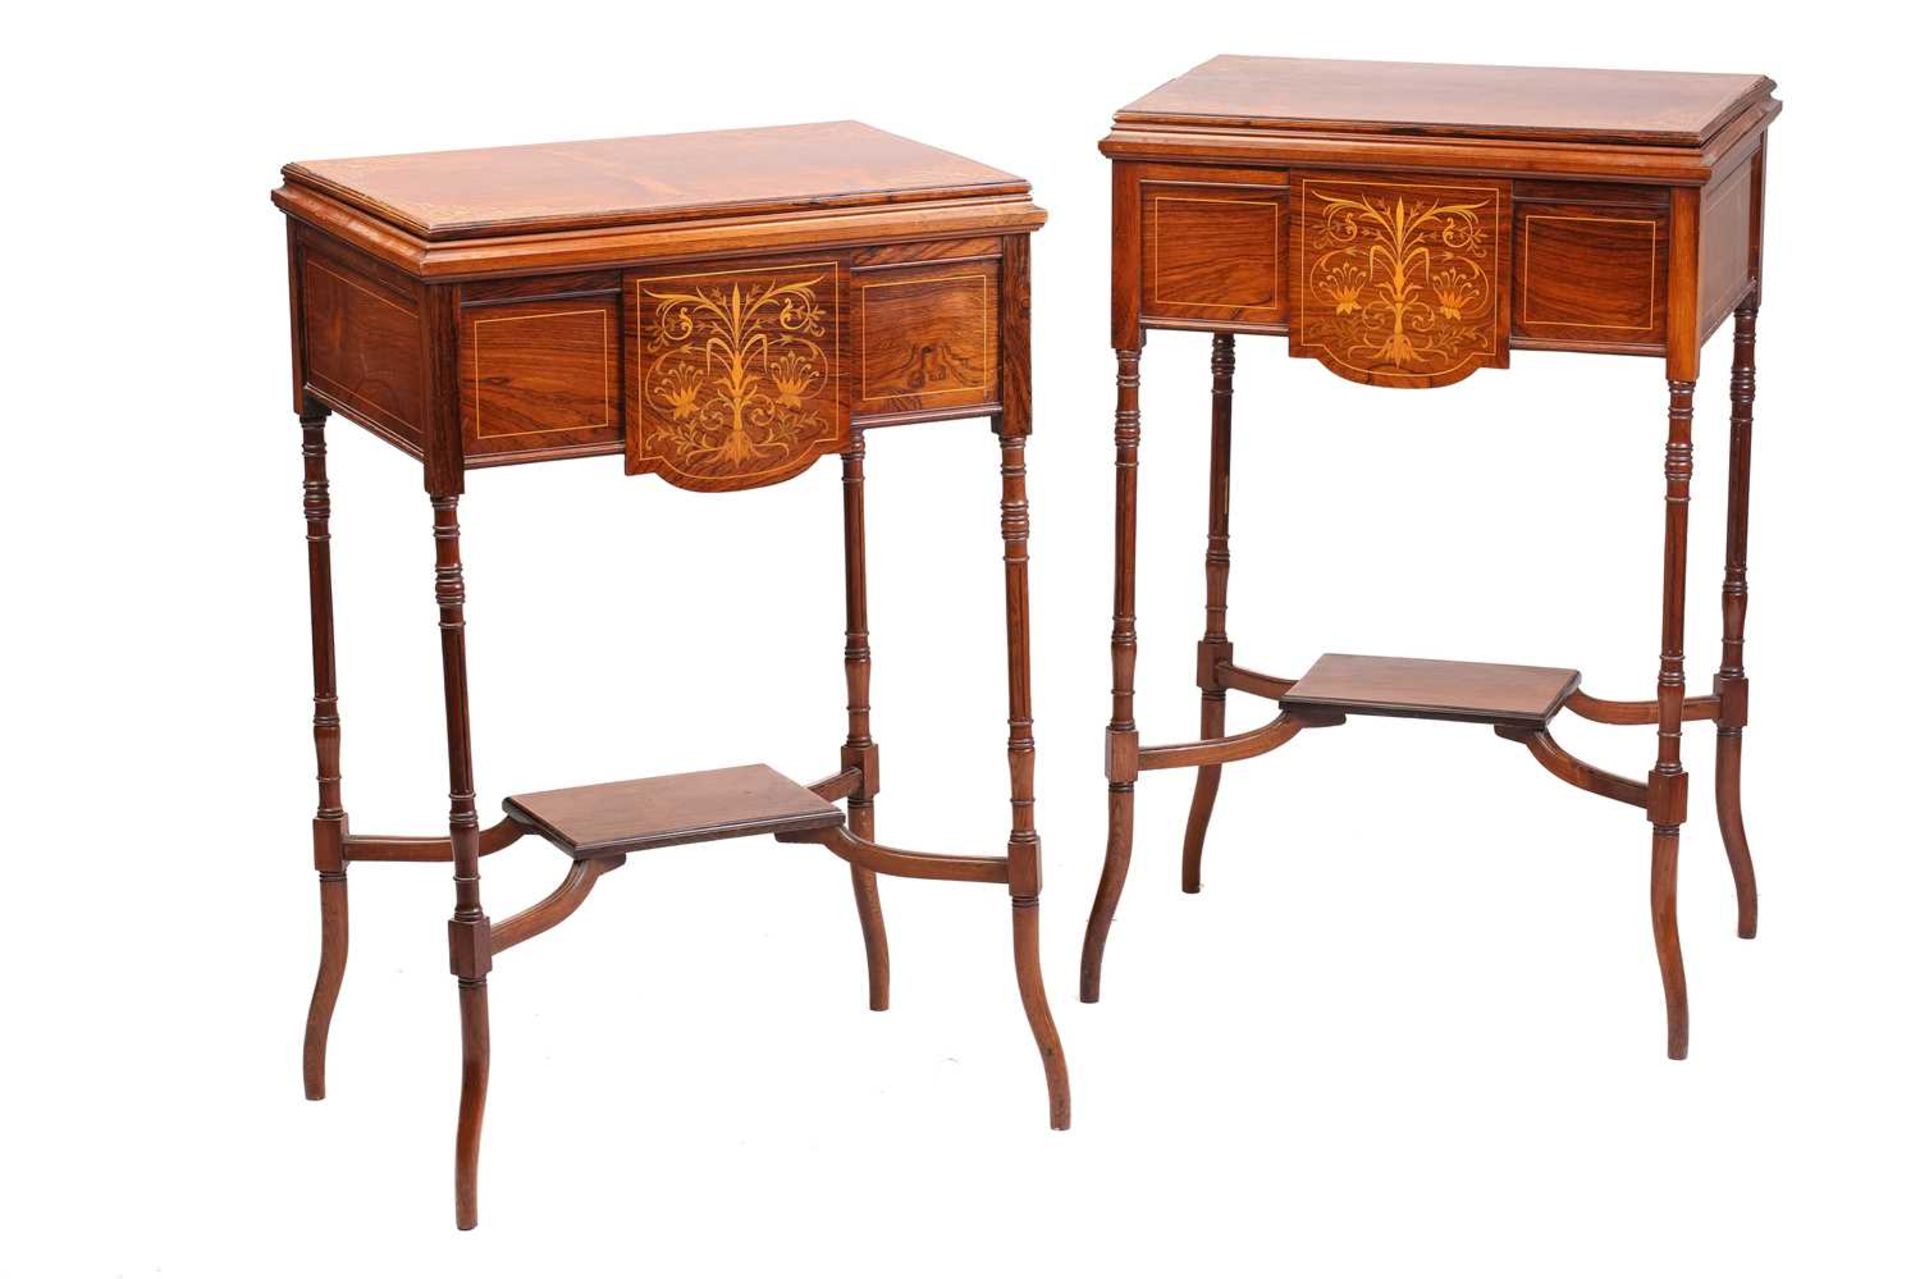 A pair of Edwardian rectangular figured rosewood jardiniere/ wine cooler tables, possibly by Edwards